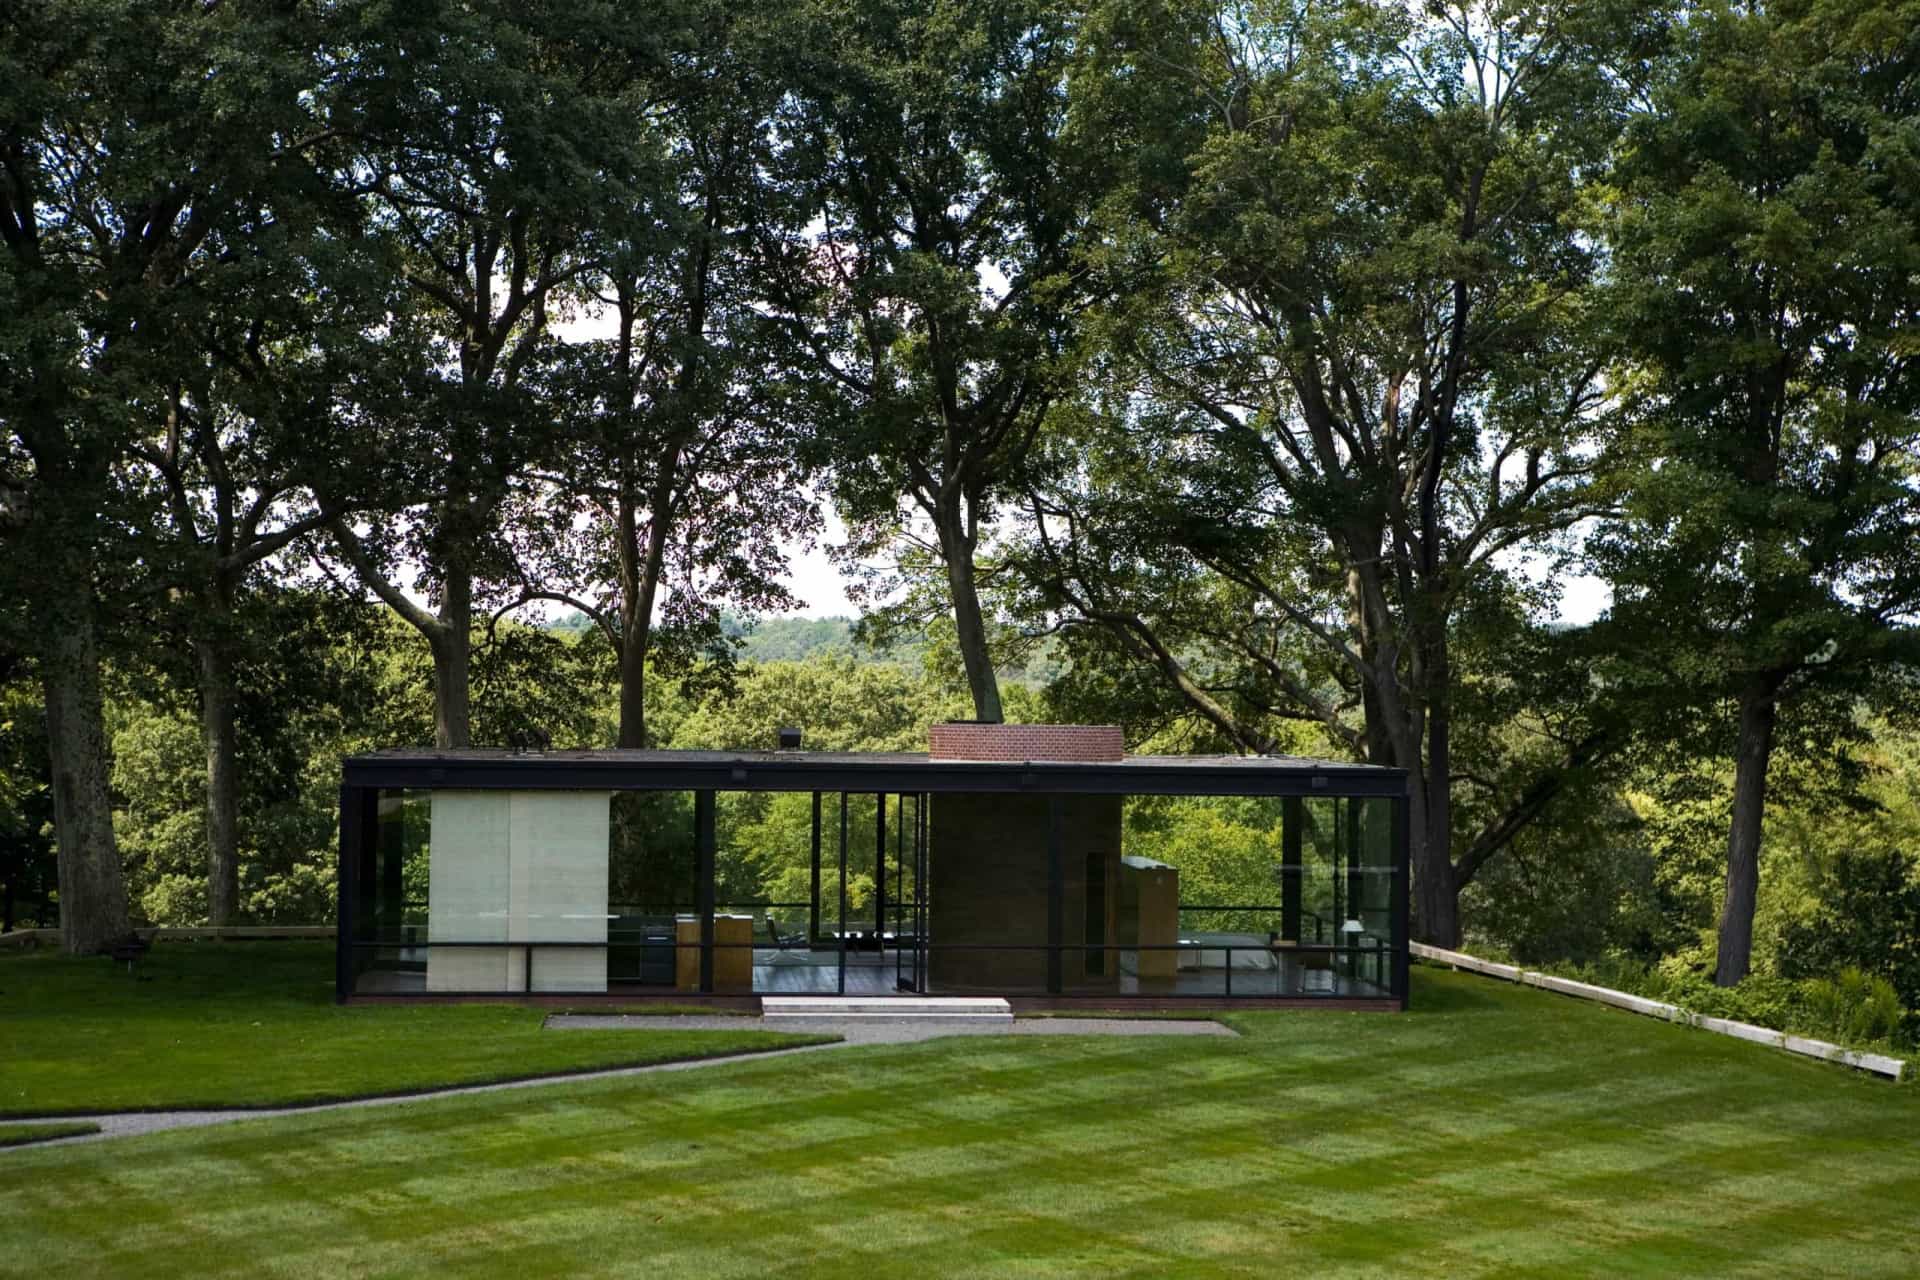 <p>Certainly one of the more unusual of Connecticut's historic properties, the Glass House is a transparent abode that was once the home of American architect Philip Johnson. Open to the public between mid-April and mid-November, the residence remains of the best examples of modernist architecture in the country.</p><p><a href="https://www.msn.com/en-us/community/channel/vid-7xx8mnucu55yw63we9va2gwr7uihbxwc68fxqp25x6tg4ftibpra?cvid=94631541bc0f4f89bfd59158d696ad7e">Follow us and access great exclusive content everyday</a></p>